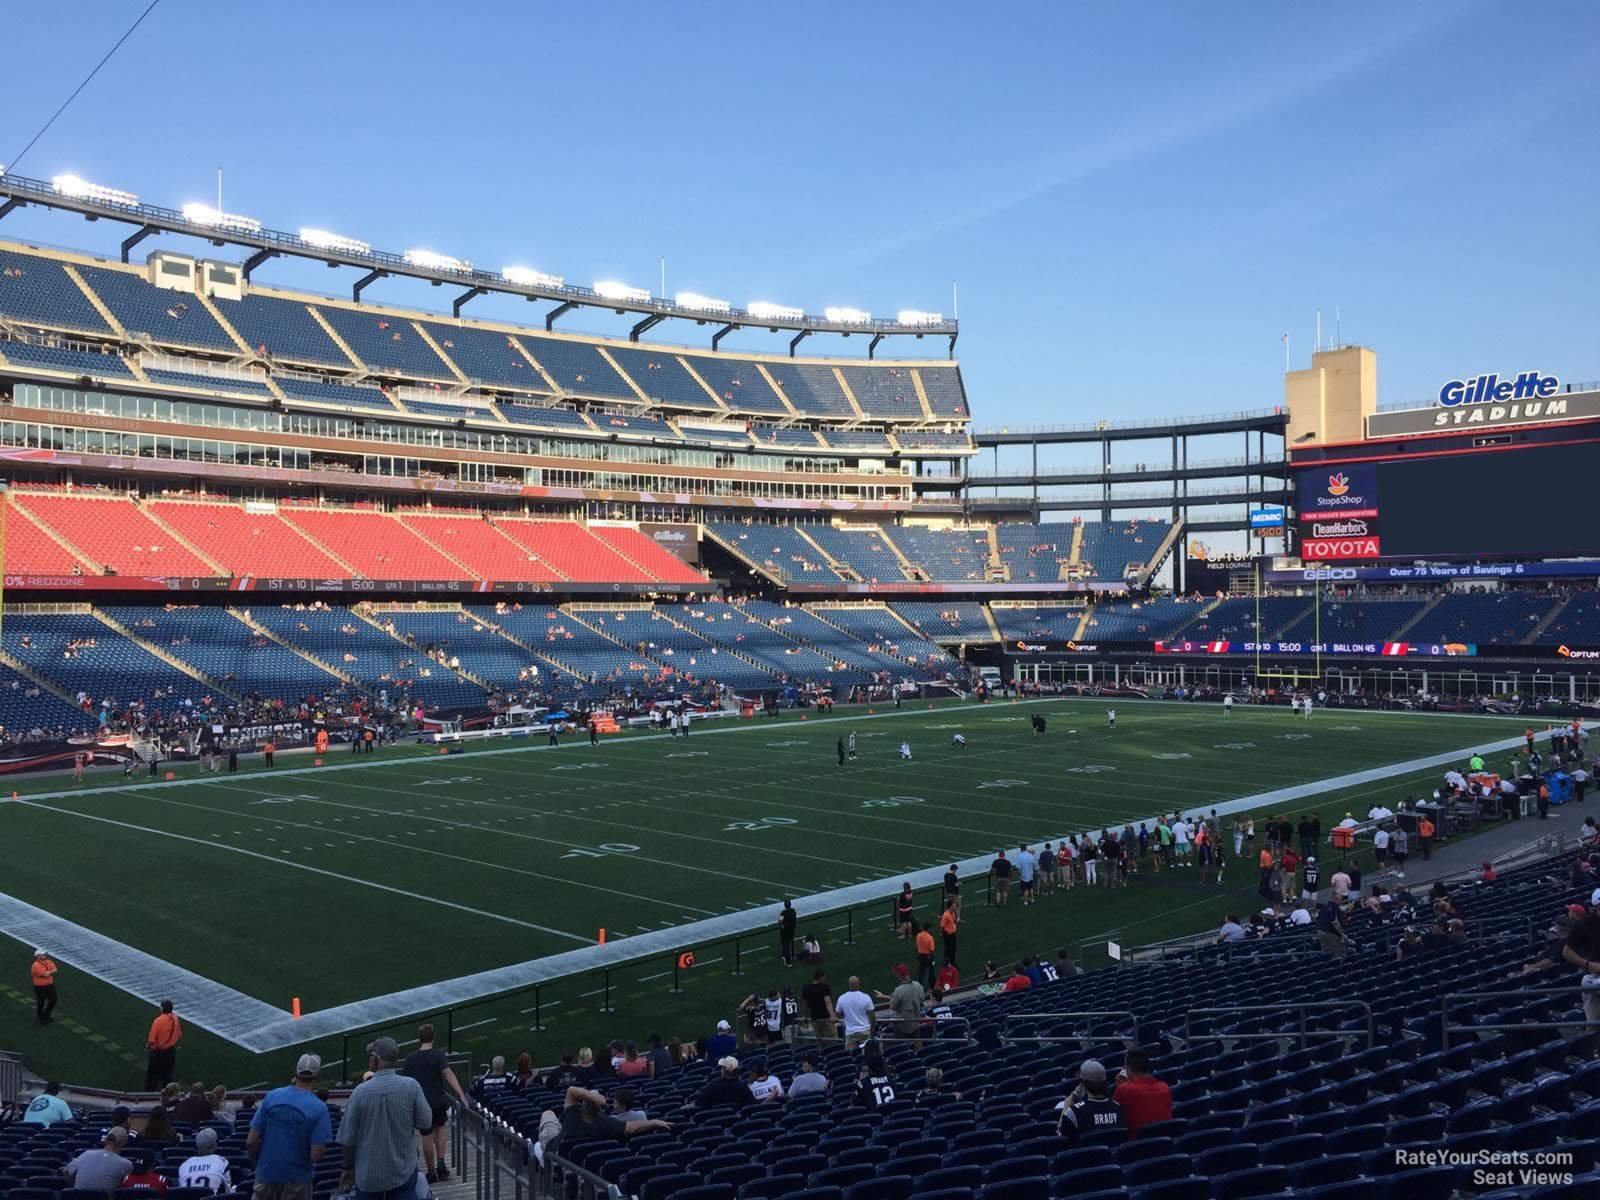 section 138, row 29 seat view  for football - gillette stadium